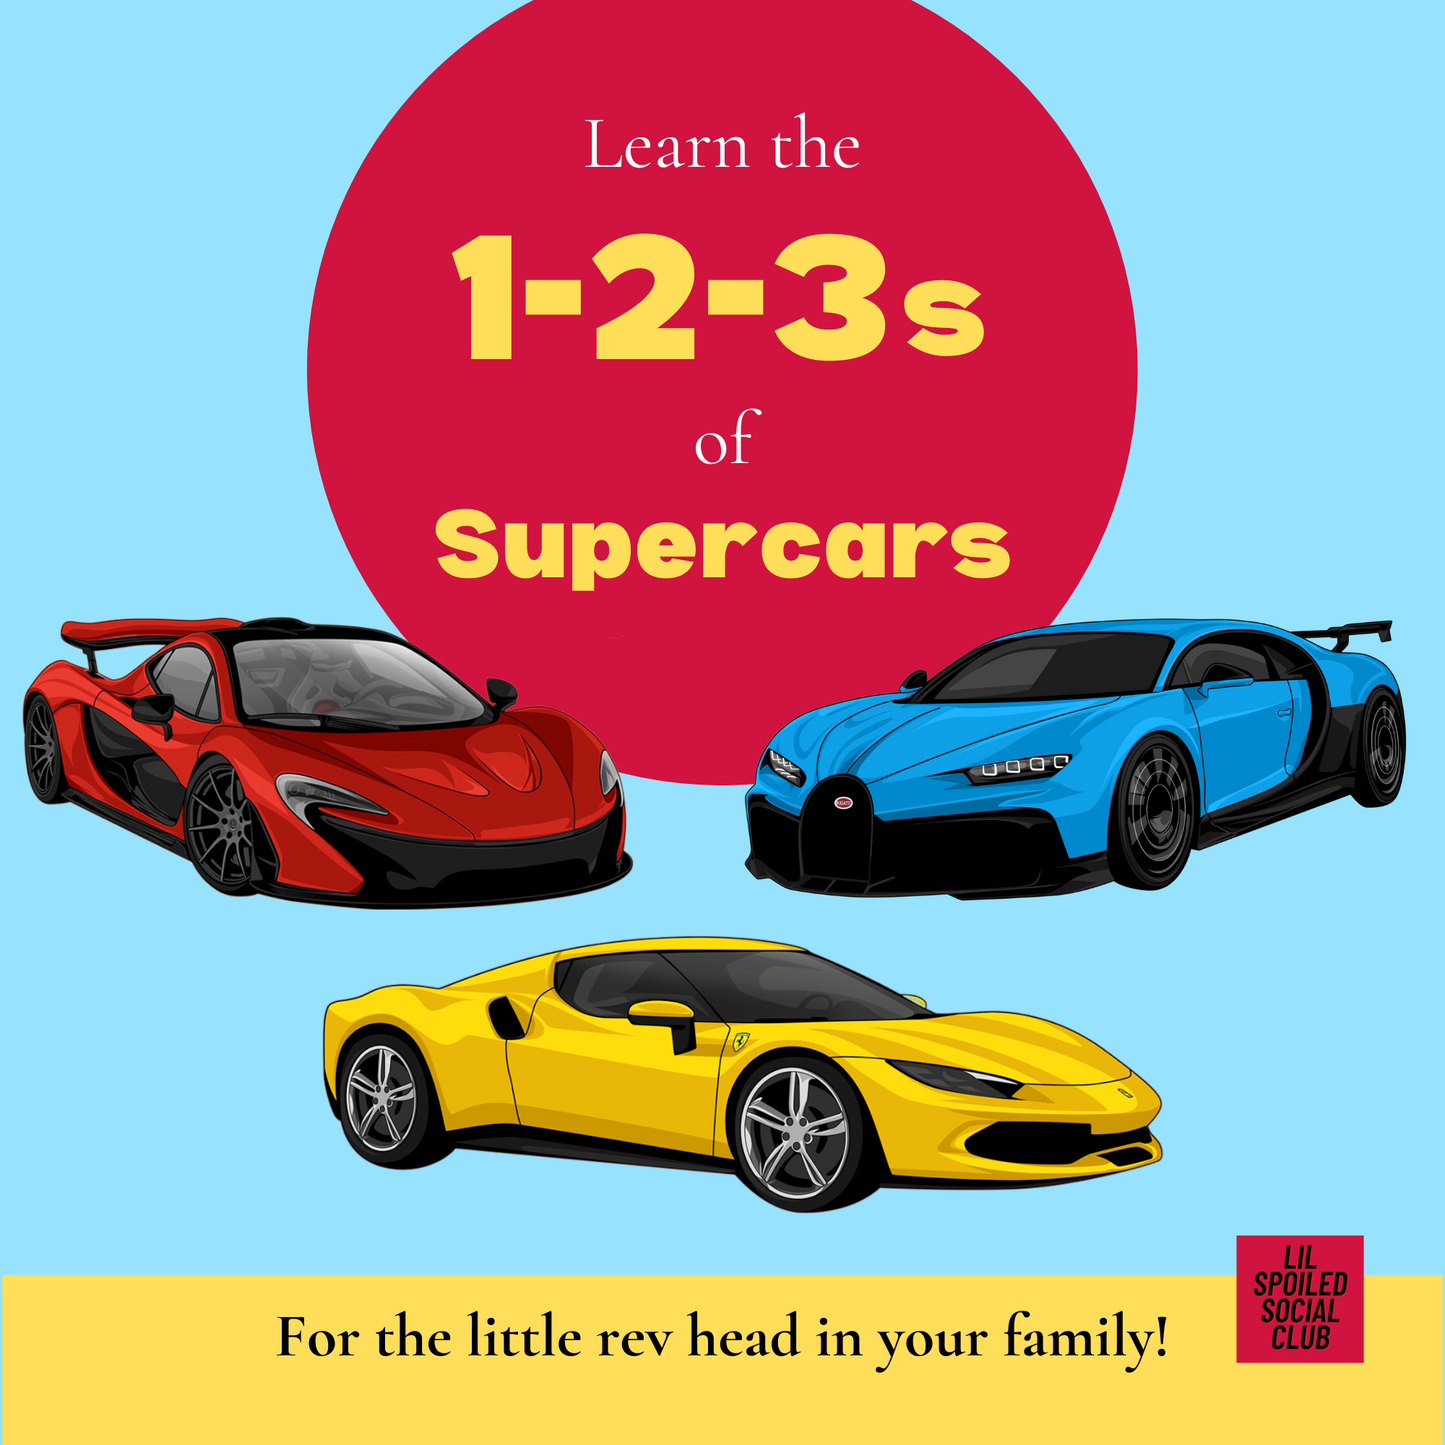 Learn the 1-2-3s of Supercars